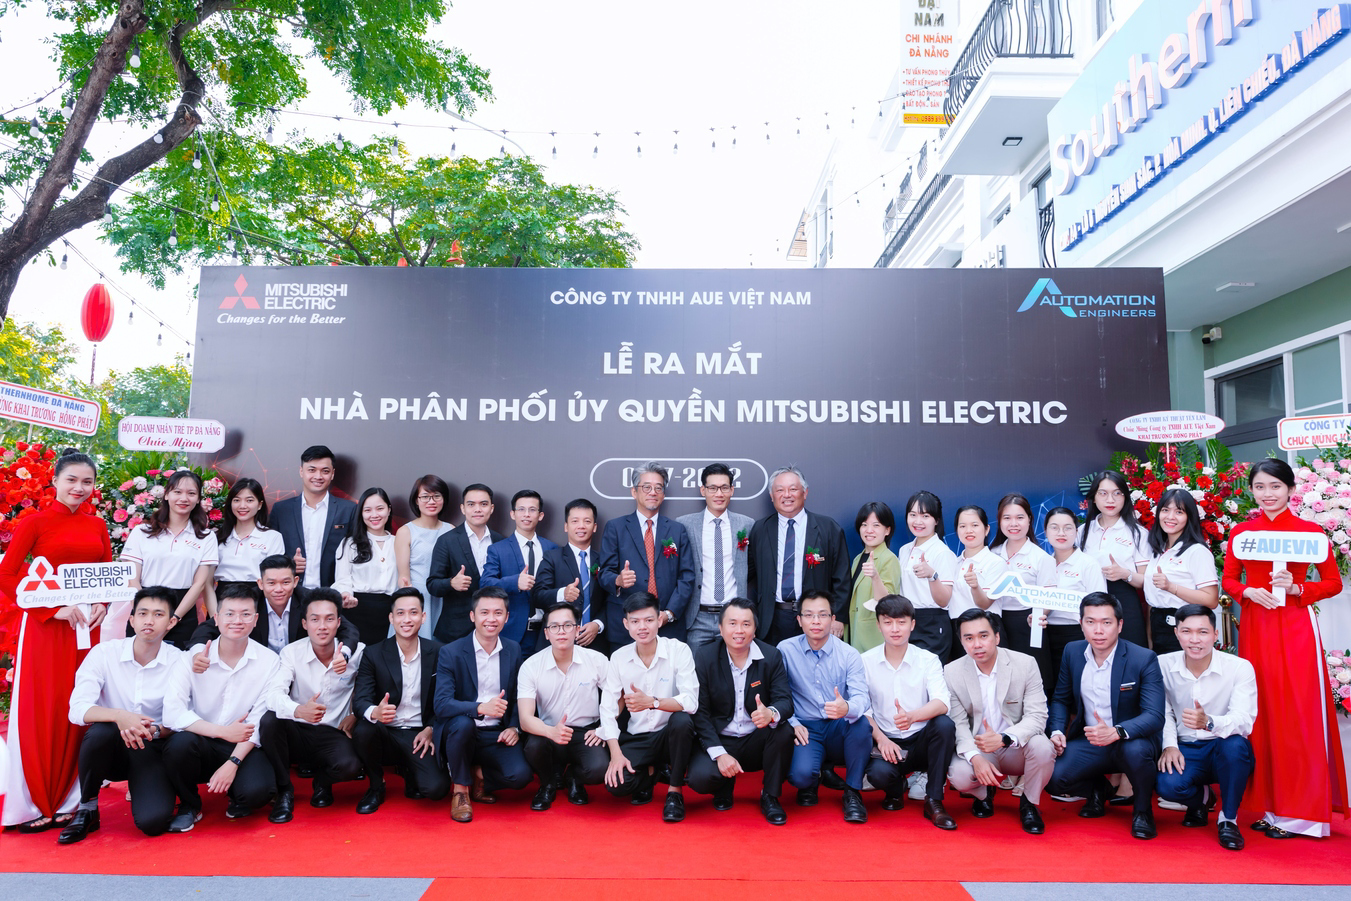 Mitsubishi Electric's Factory Automation Solution Center (FASC) in Da Nang